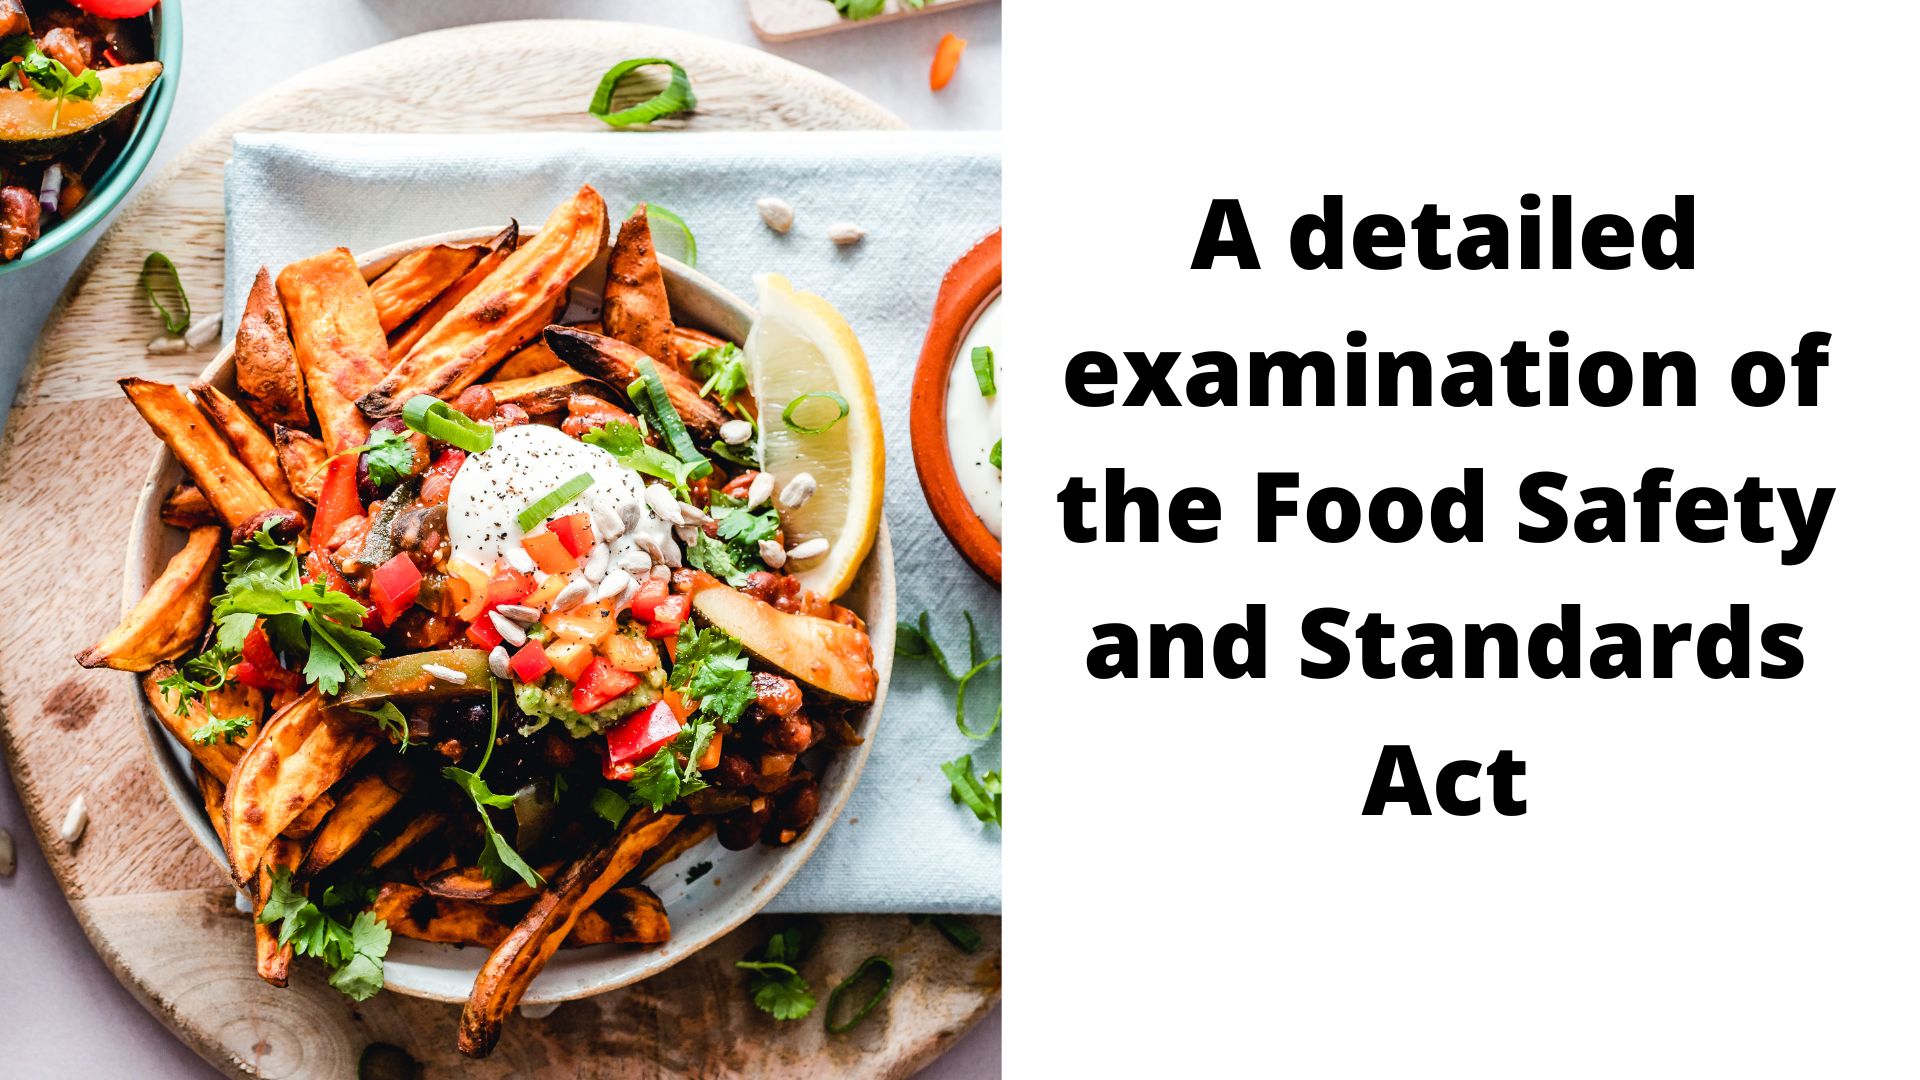 A detailed examination of the Food Safety and Standards Act